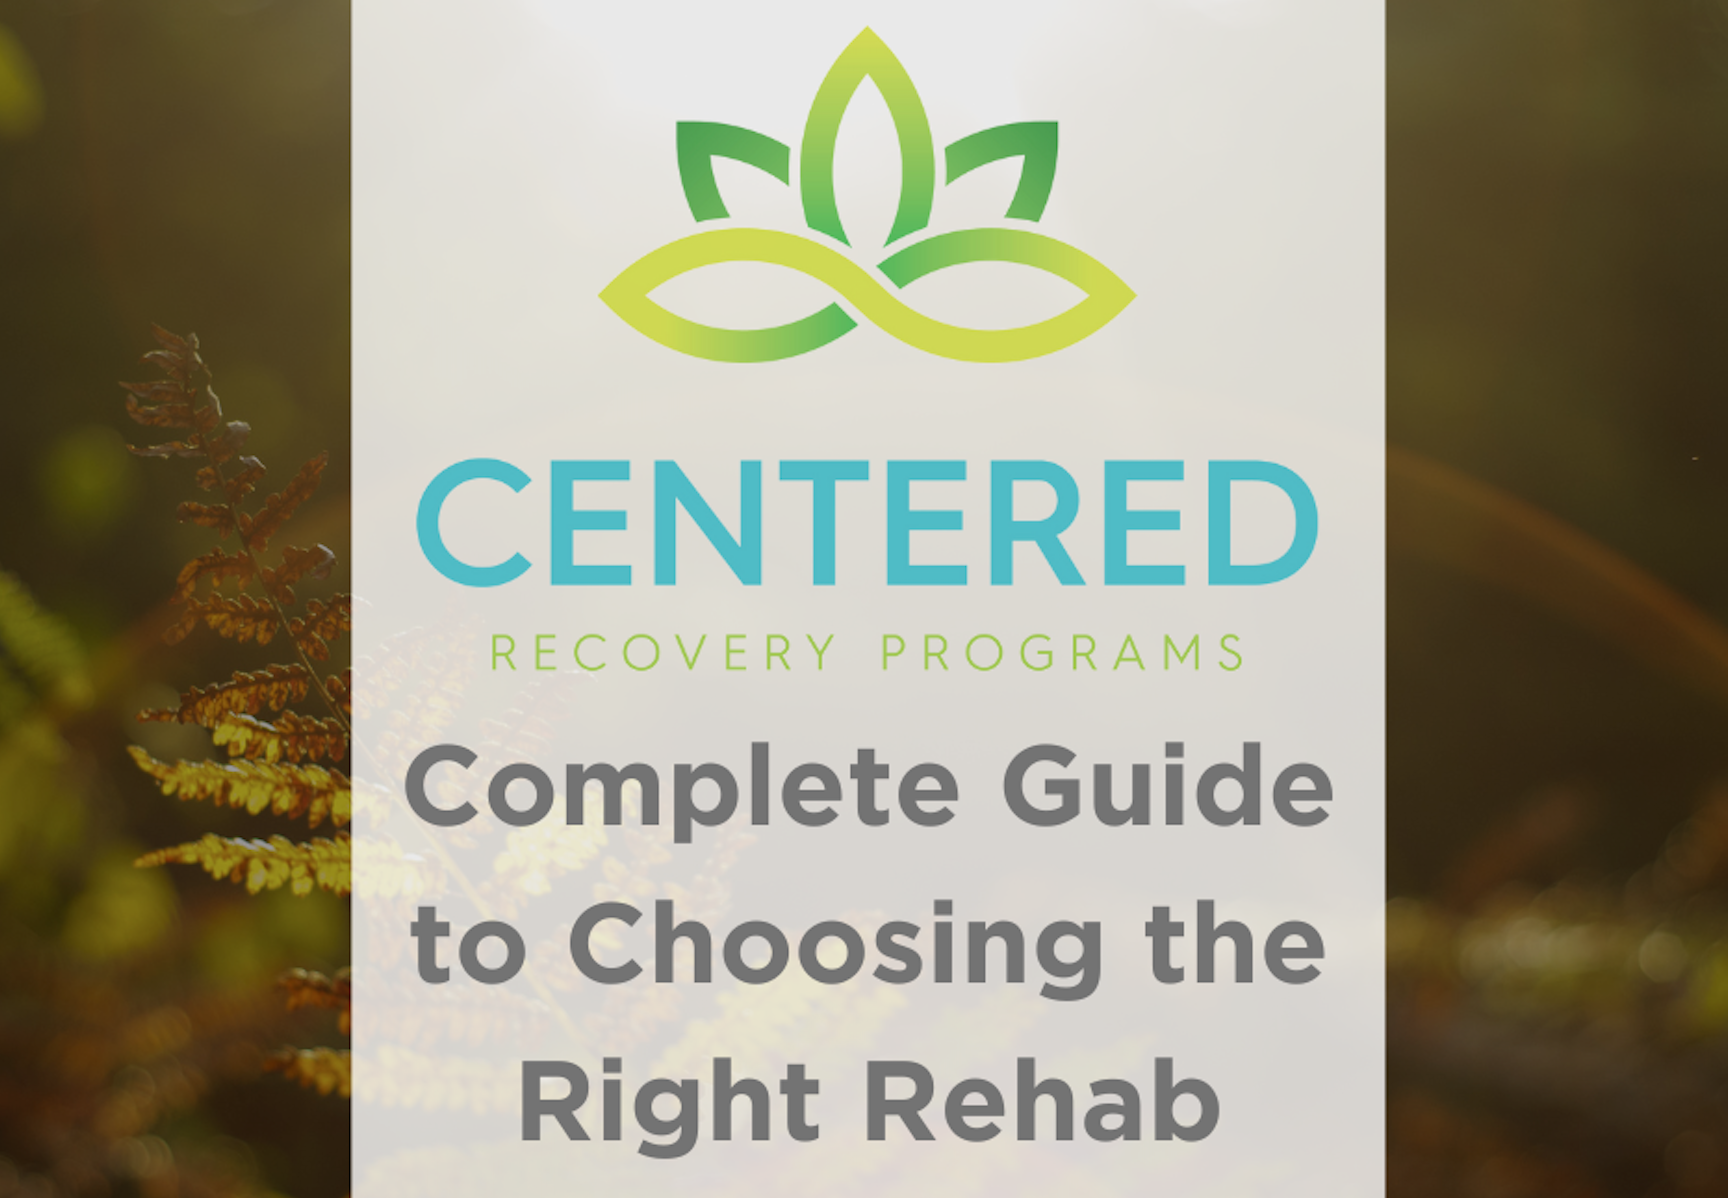 The Complete Guide to Choosing the Right Rehab in Georgia